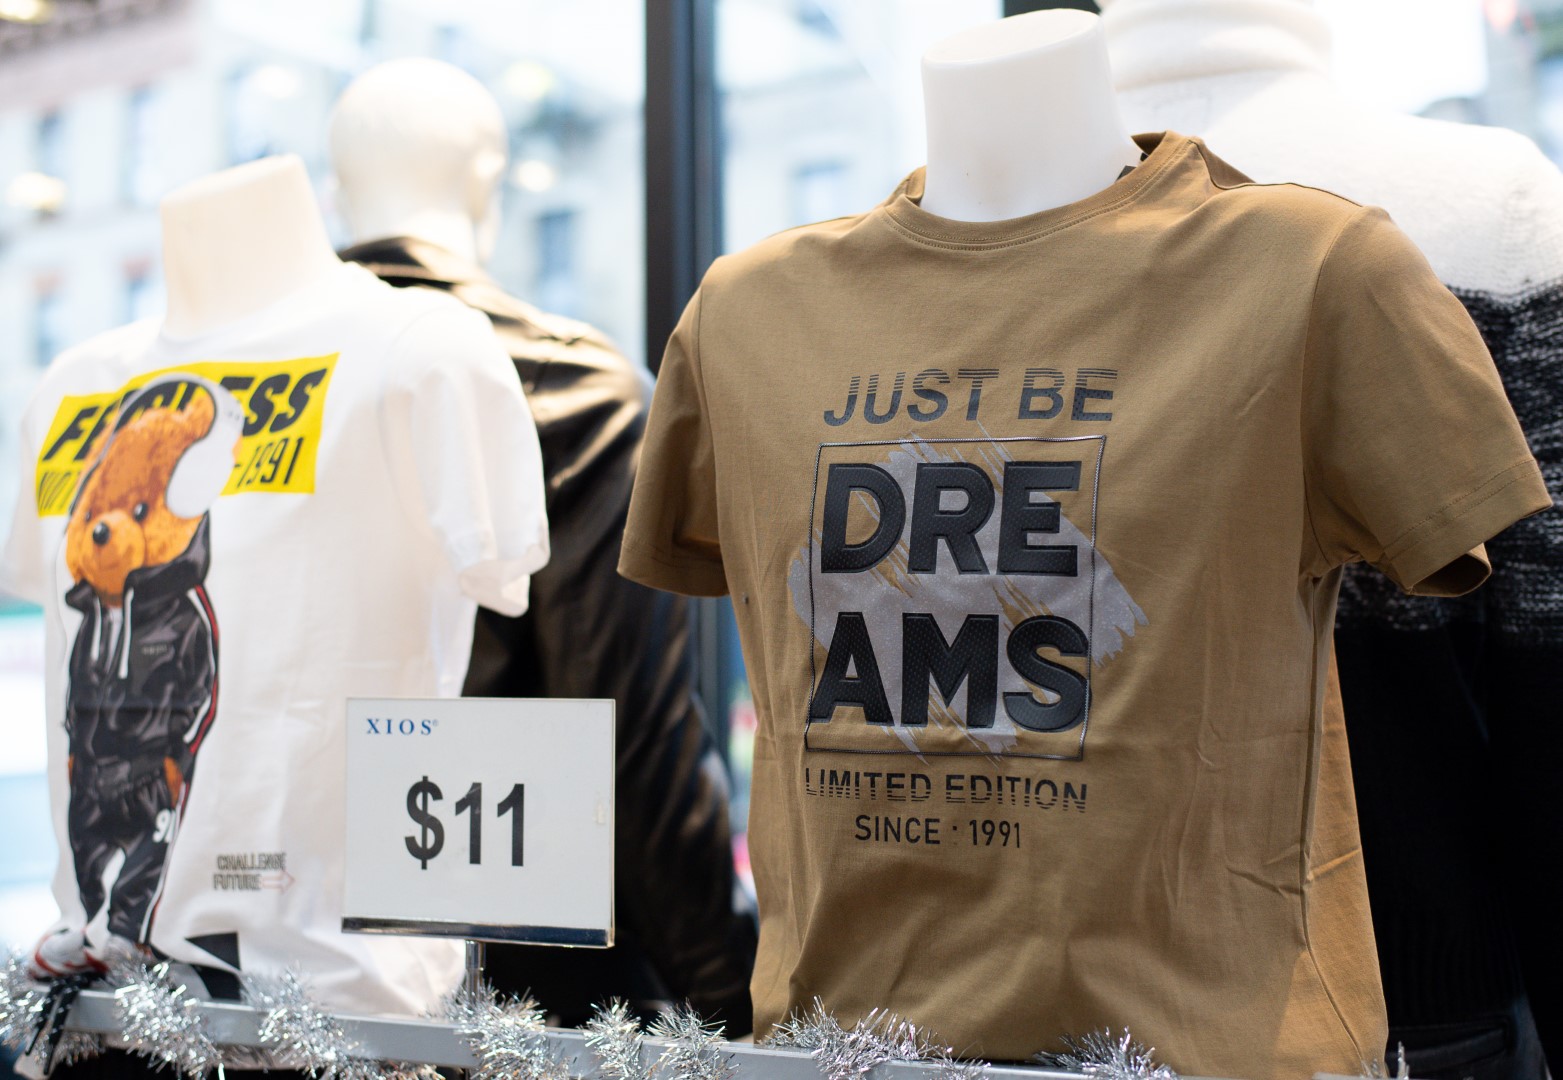 Mannequin displaying a limited edition "just be dreams" t-shirt, with other shirts visible, positioned in a store window adorned with silver festive decoration, price tag showing $11.